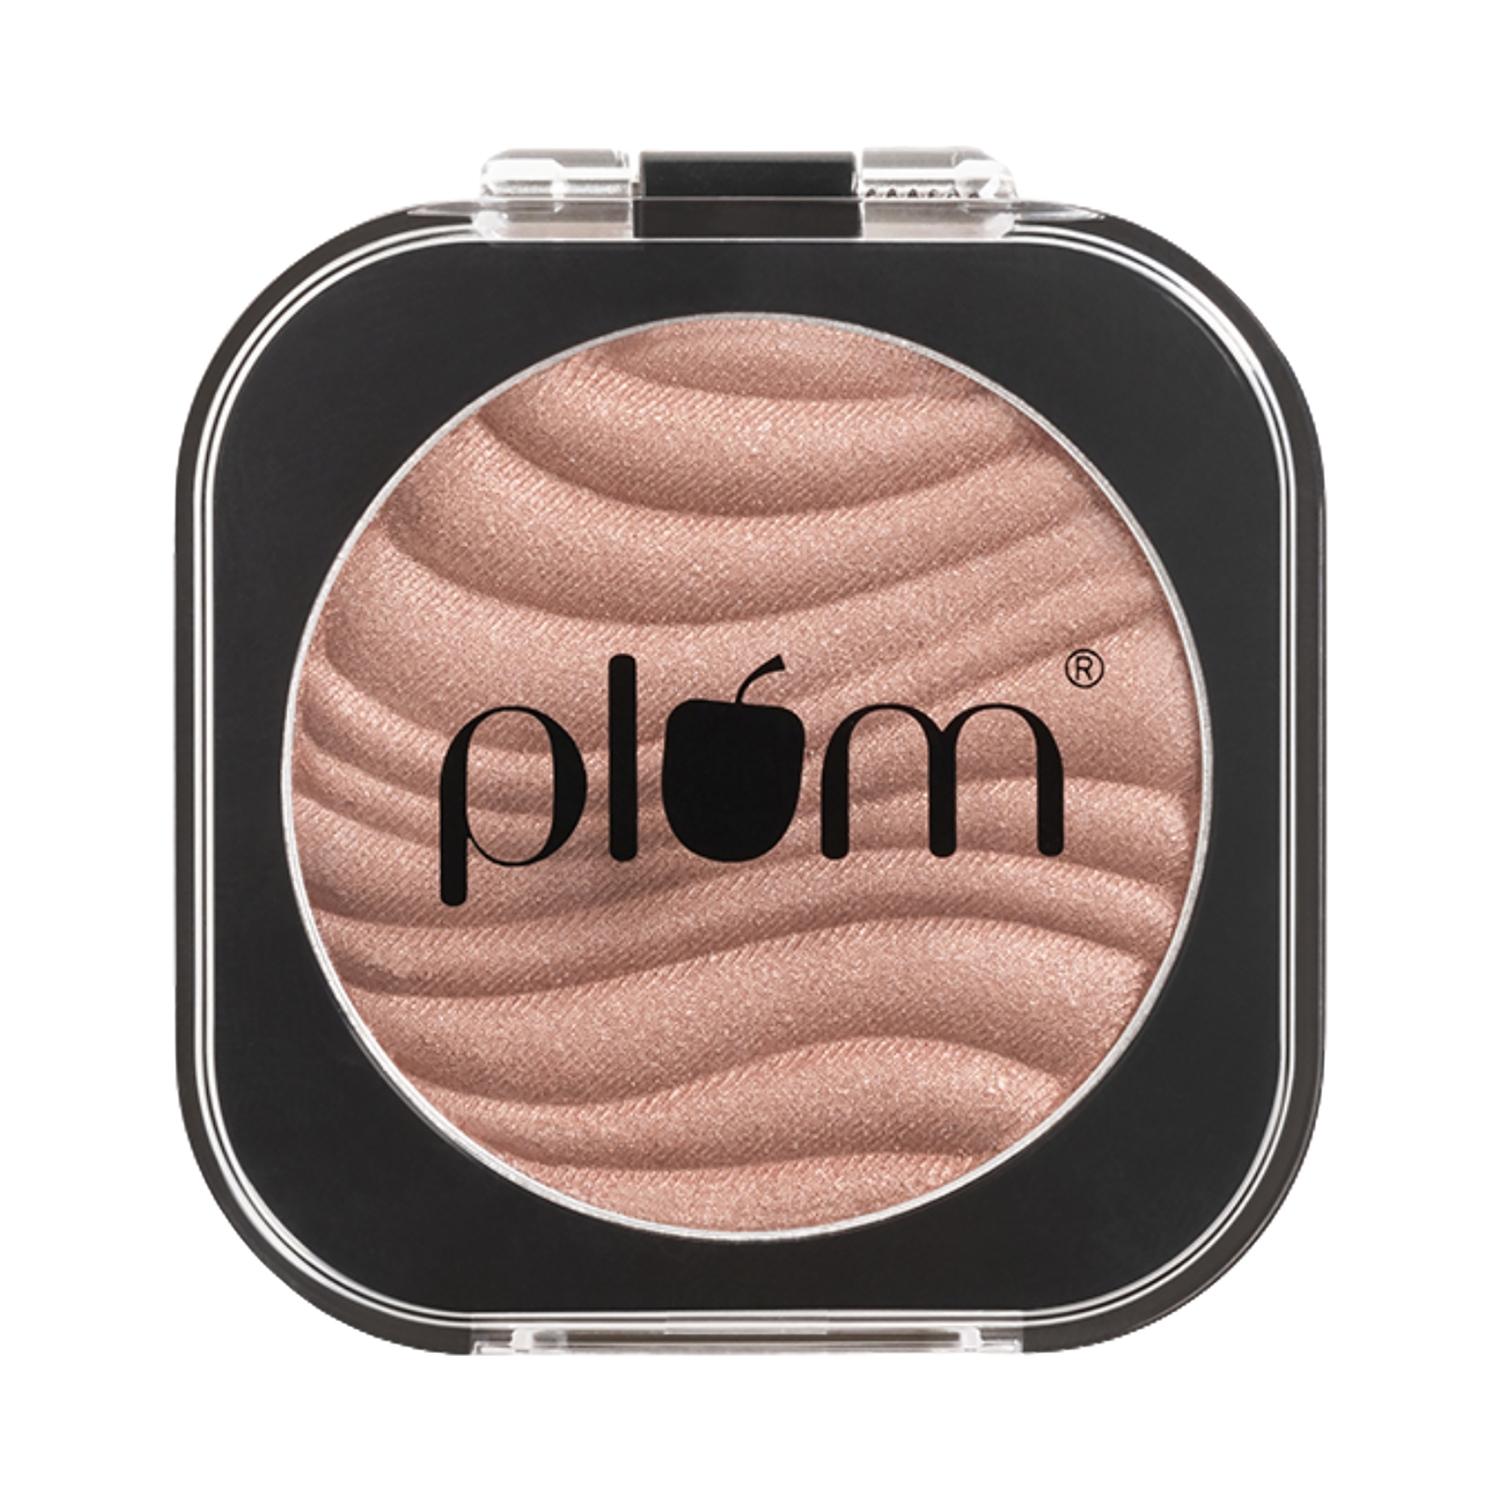 plum there you glow highlighter - 123 rose n' shine (4.5g)